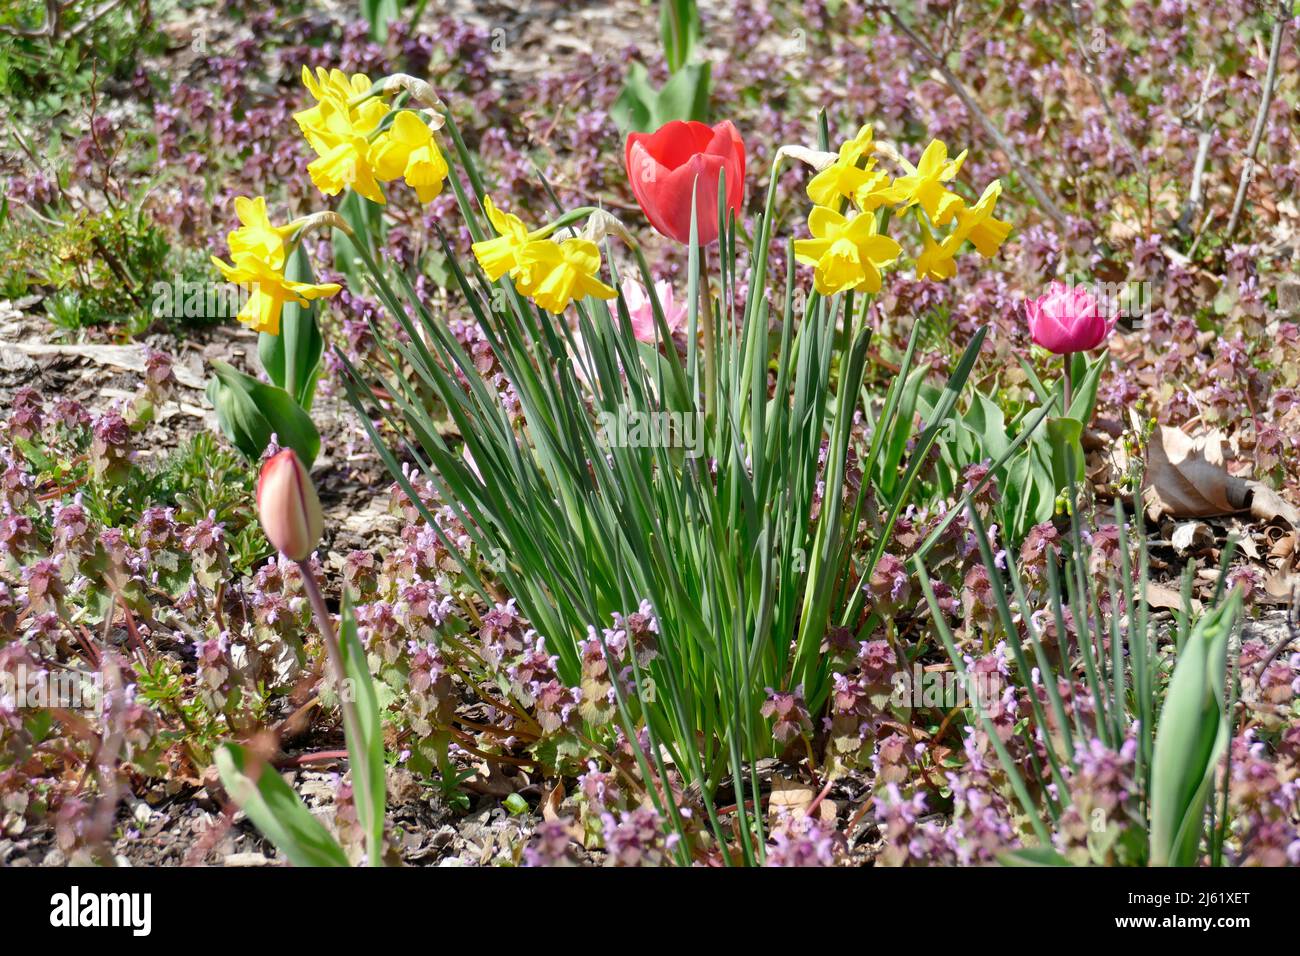 Red and yellow flowering tulips and daffodils, closeup, Germany Stock Photo